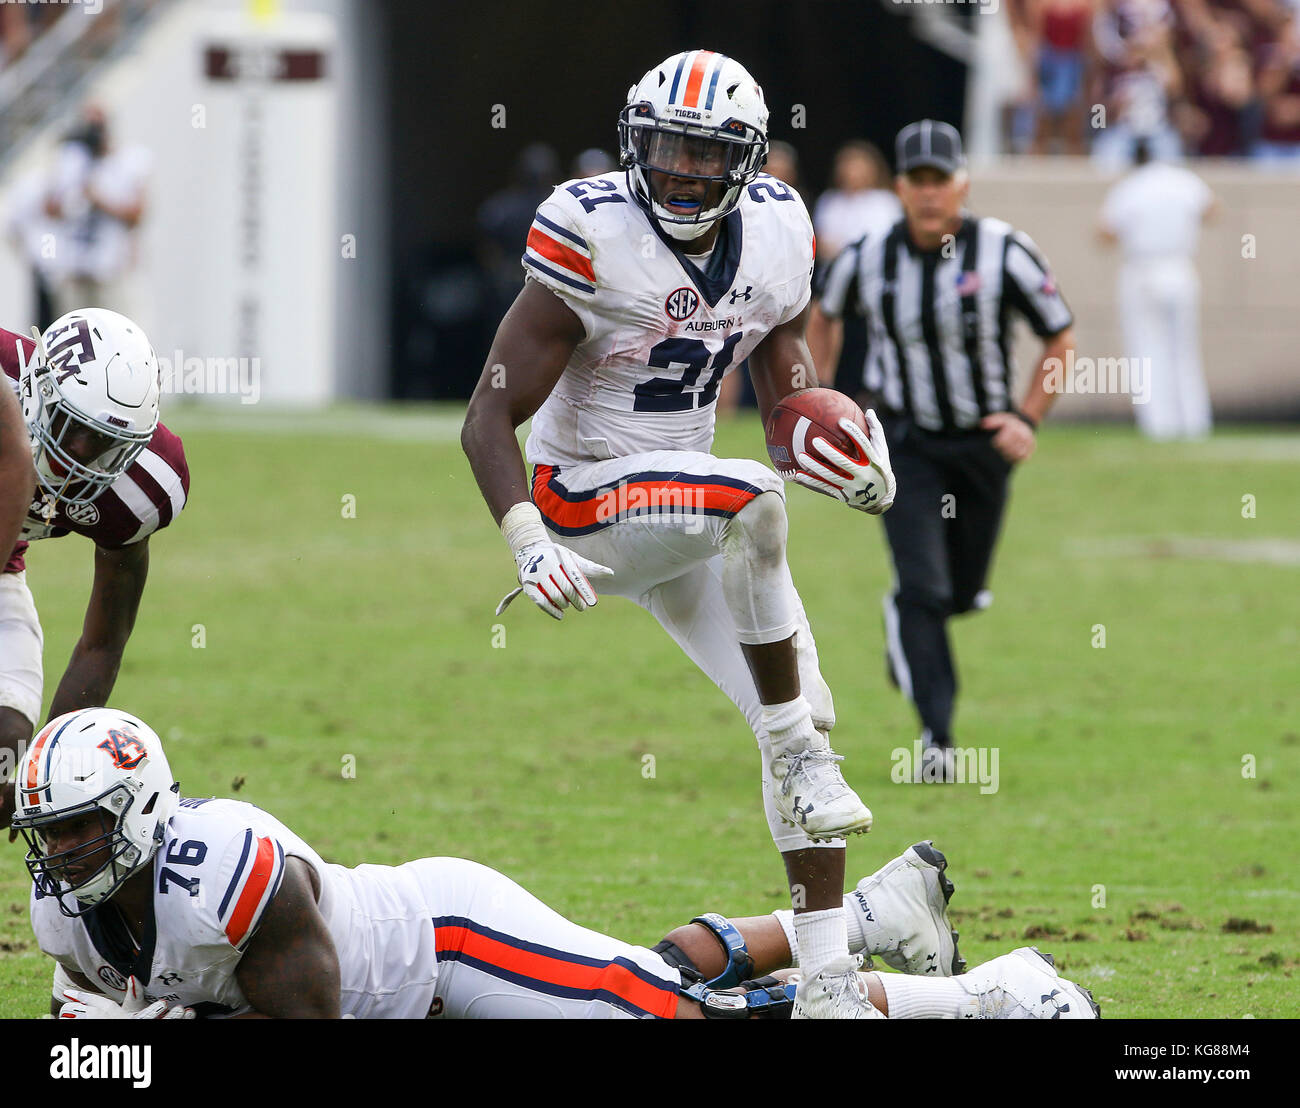 November 4, 2017: Auburn Tigers running back Kerryon Johnson (21) leaps over Auburn Tigers offensive lineman Prince Tega Wanogho (76) in the fourth quarter during the NCAA football game between the Auburn Tigers and the Texas A&M Aggies at Kyle Field in College Station, TX; John Glaser/CSM. Stock Photo